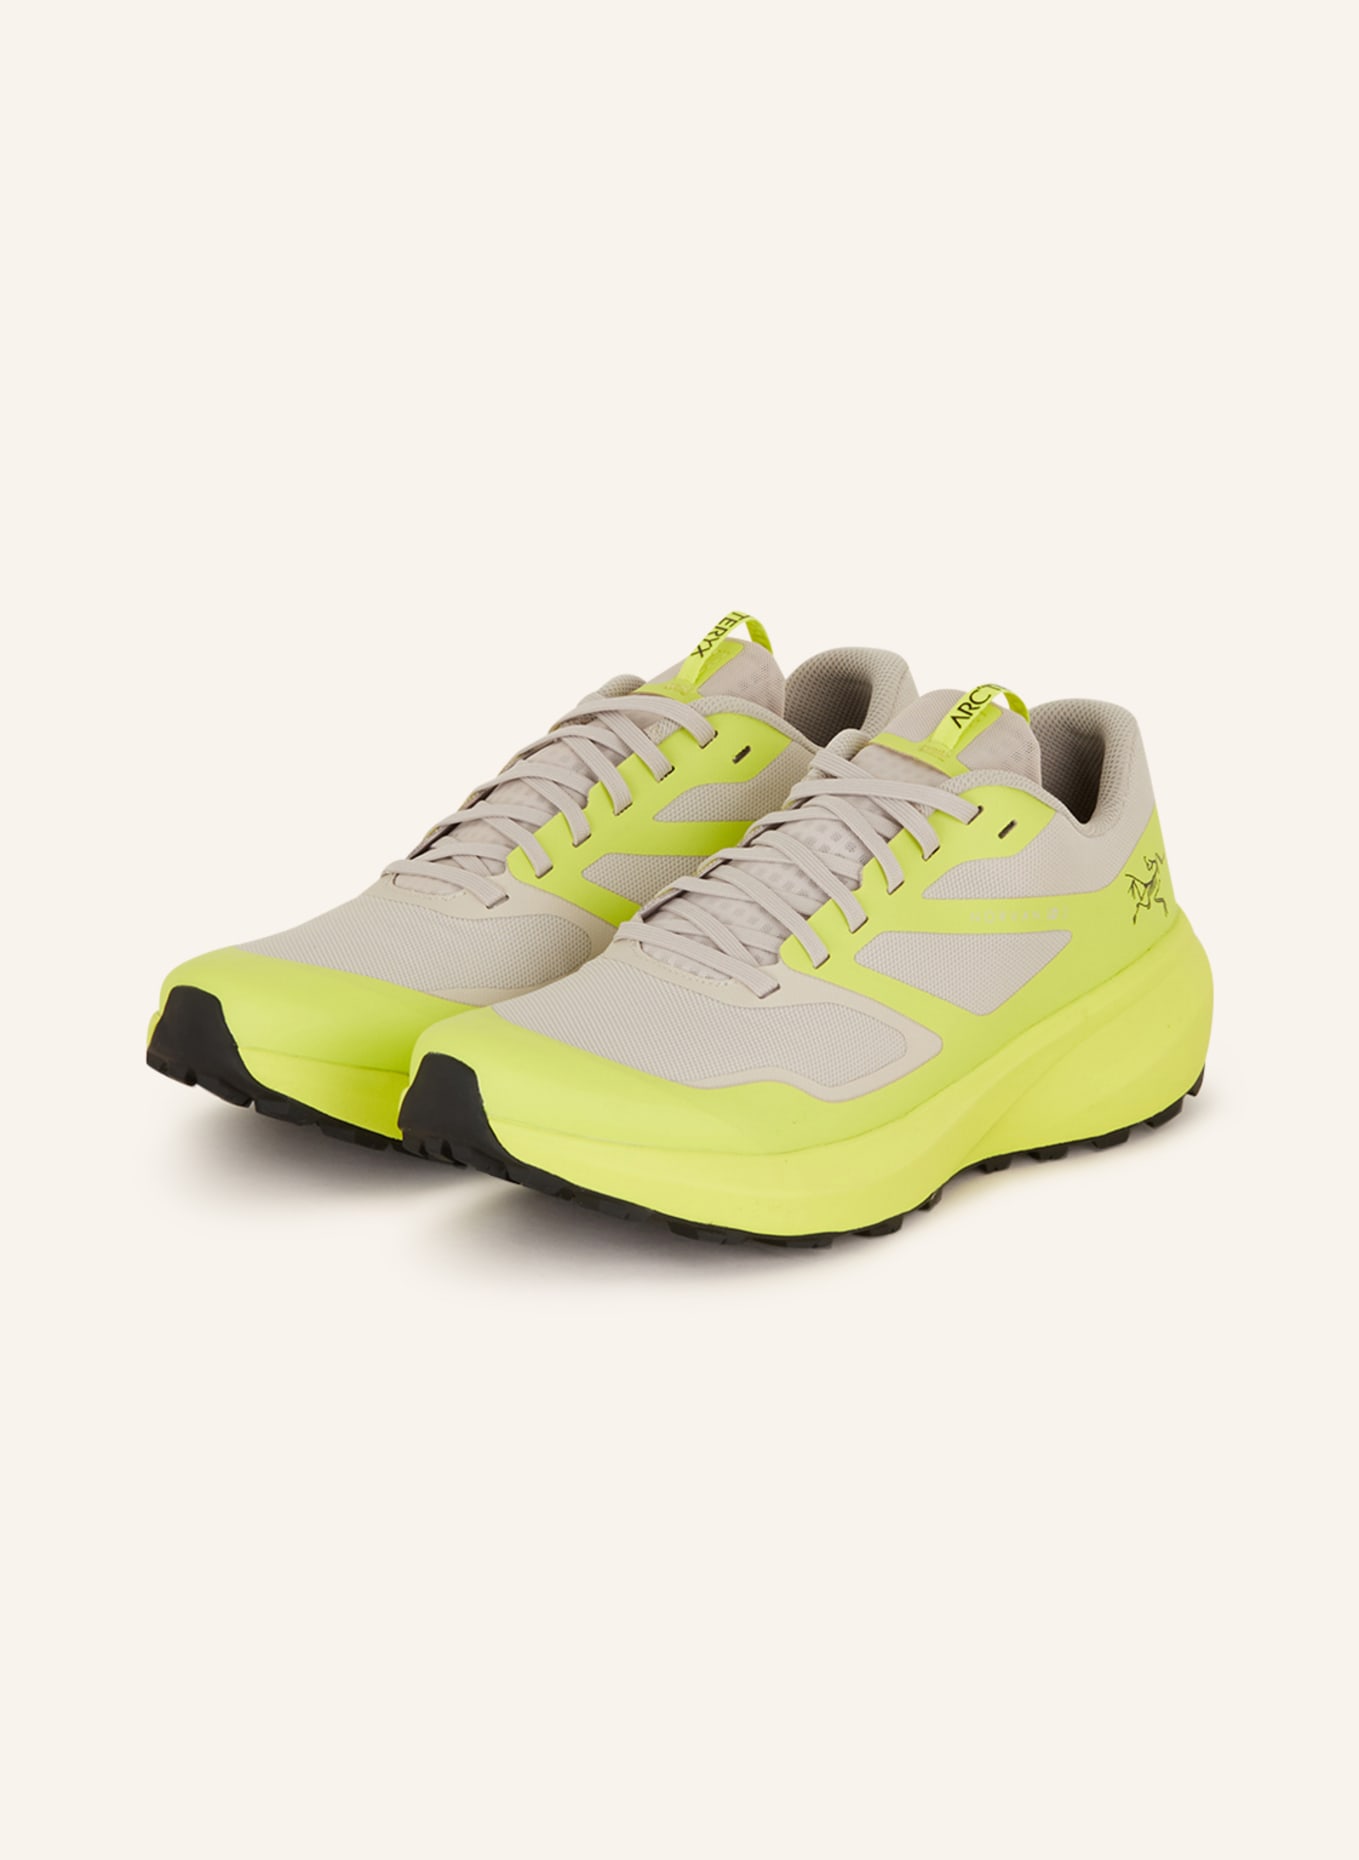 ARC'TERYX Trail running shoes NORVAN LD 3, Color: NEON YELLOW/ CREAM (Image 1)